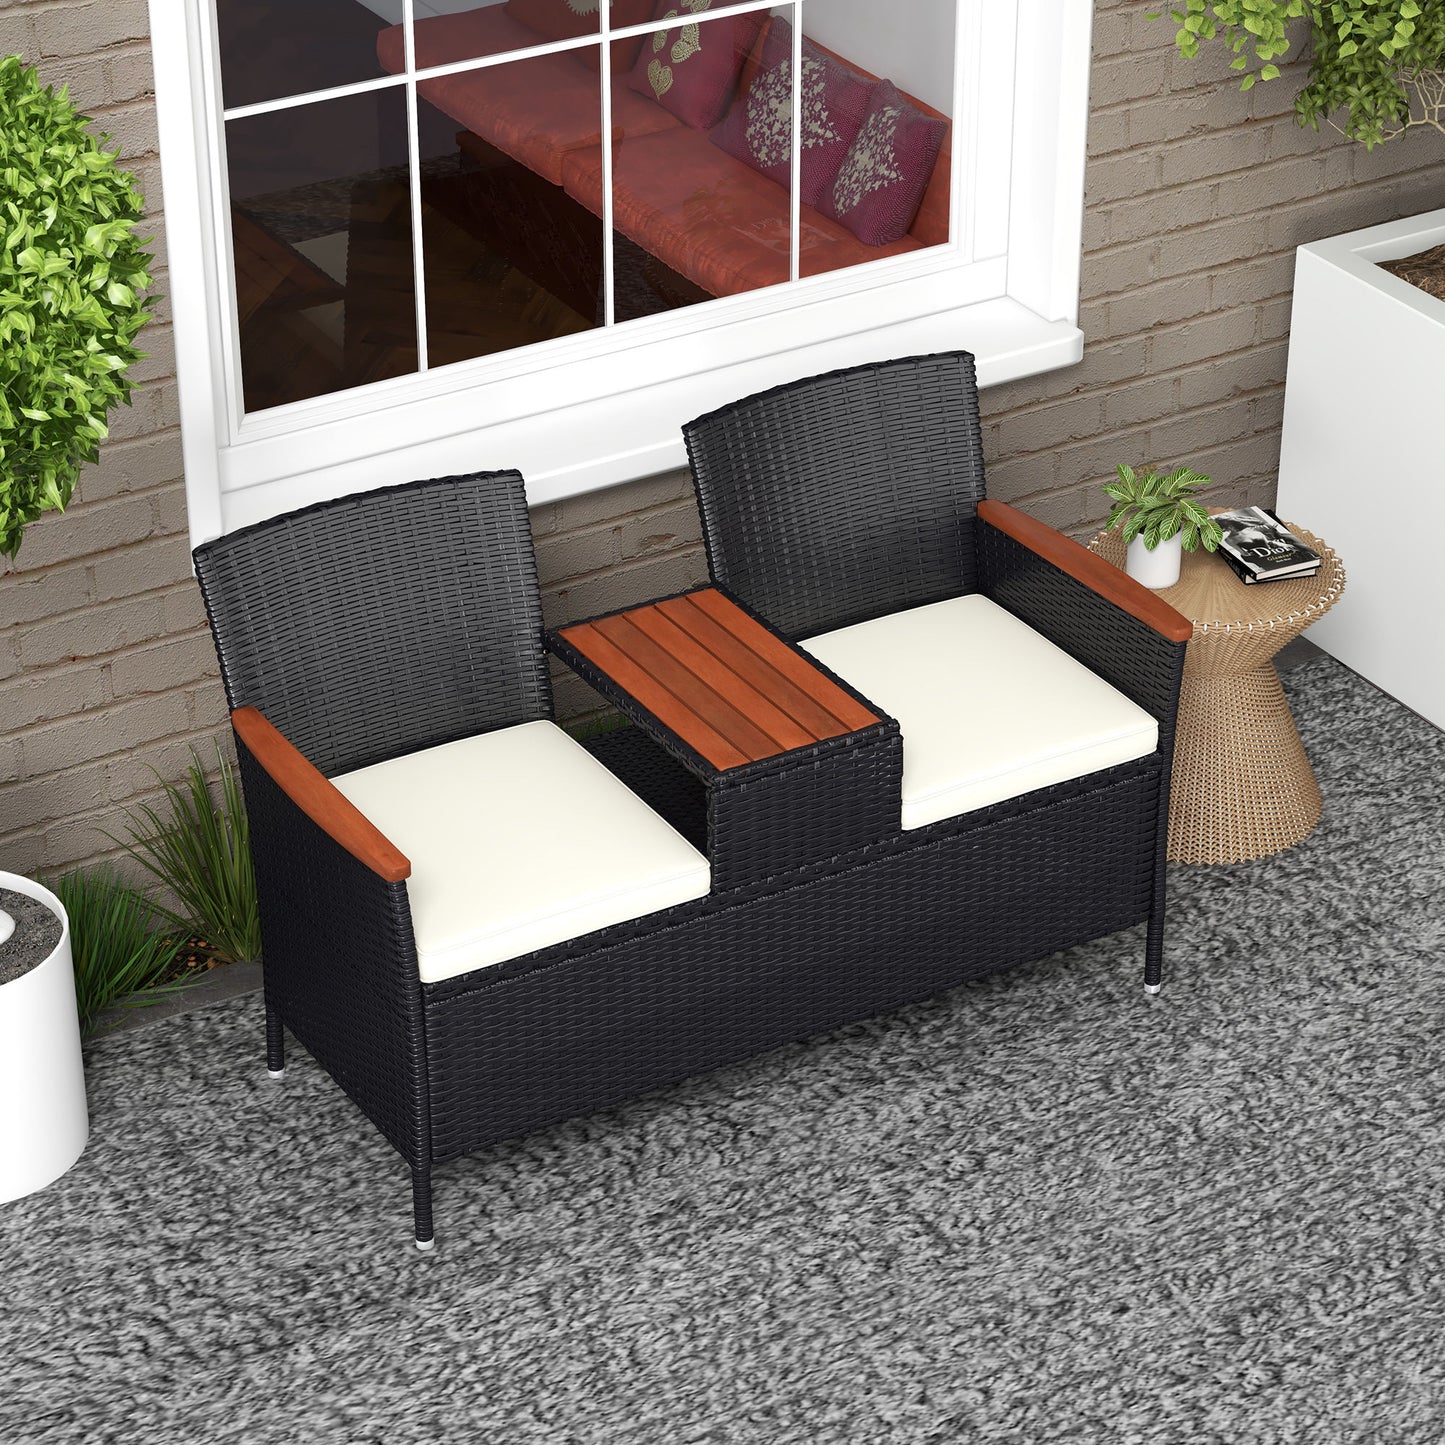 Outsunny Two-Seat Rattan Loveseat with Wood-Top Middle Table - Black